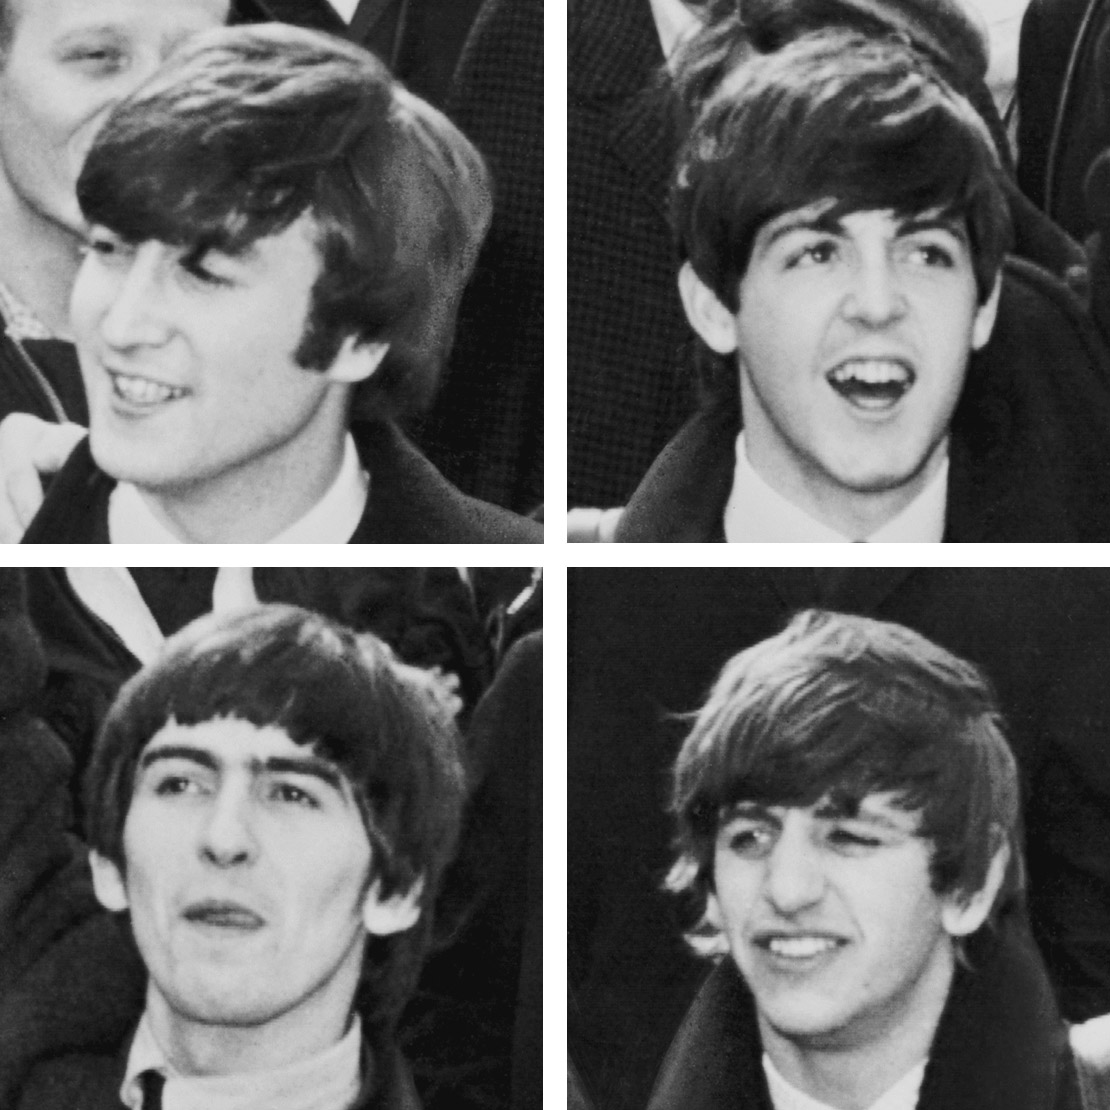 John, Paul, Ringo and George (aka The Beatles) are from Liverpool in Lancashire. Public domain image of The Beatles in New York City in 1964 via Wikimedia Commons at w.wiki/5UJy